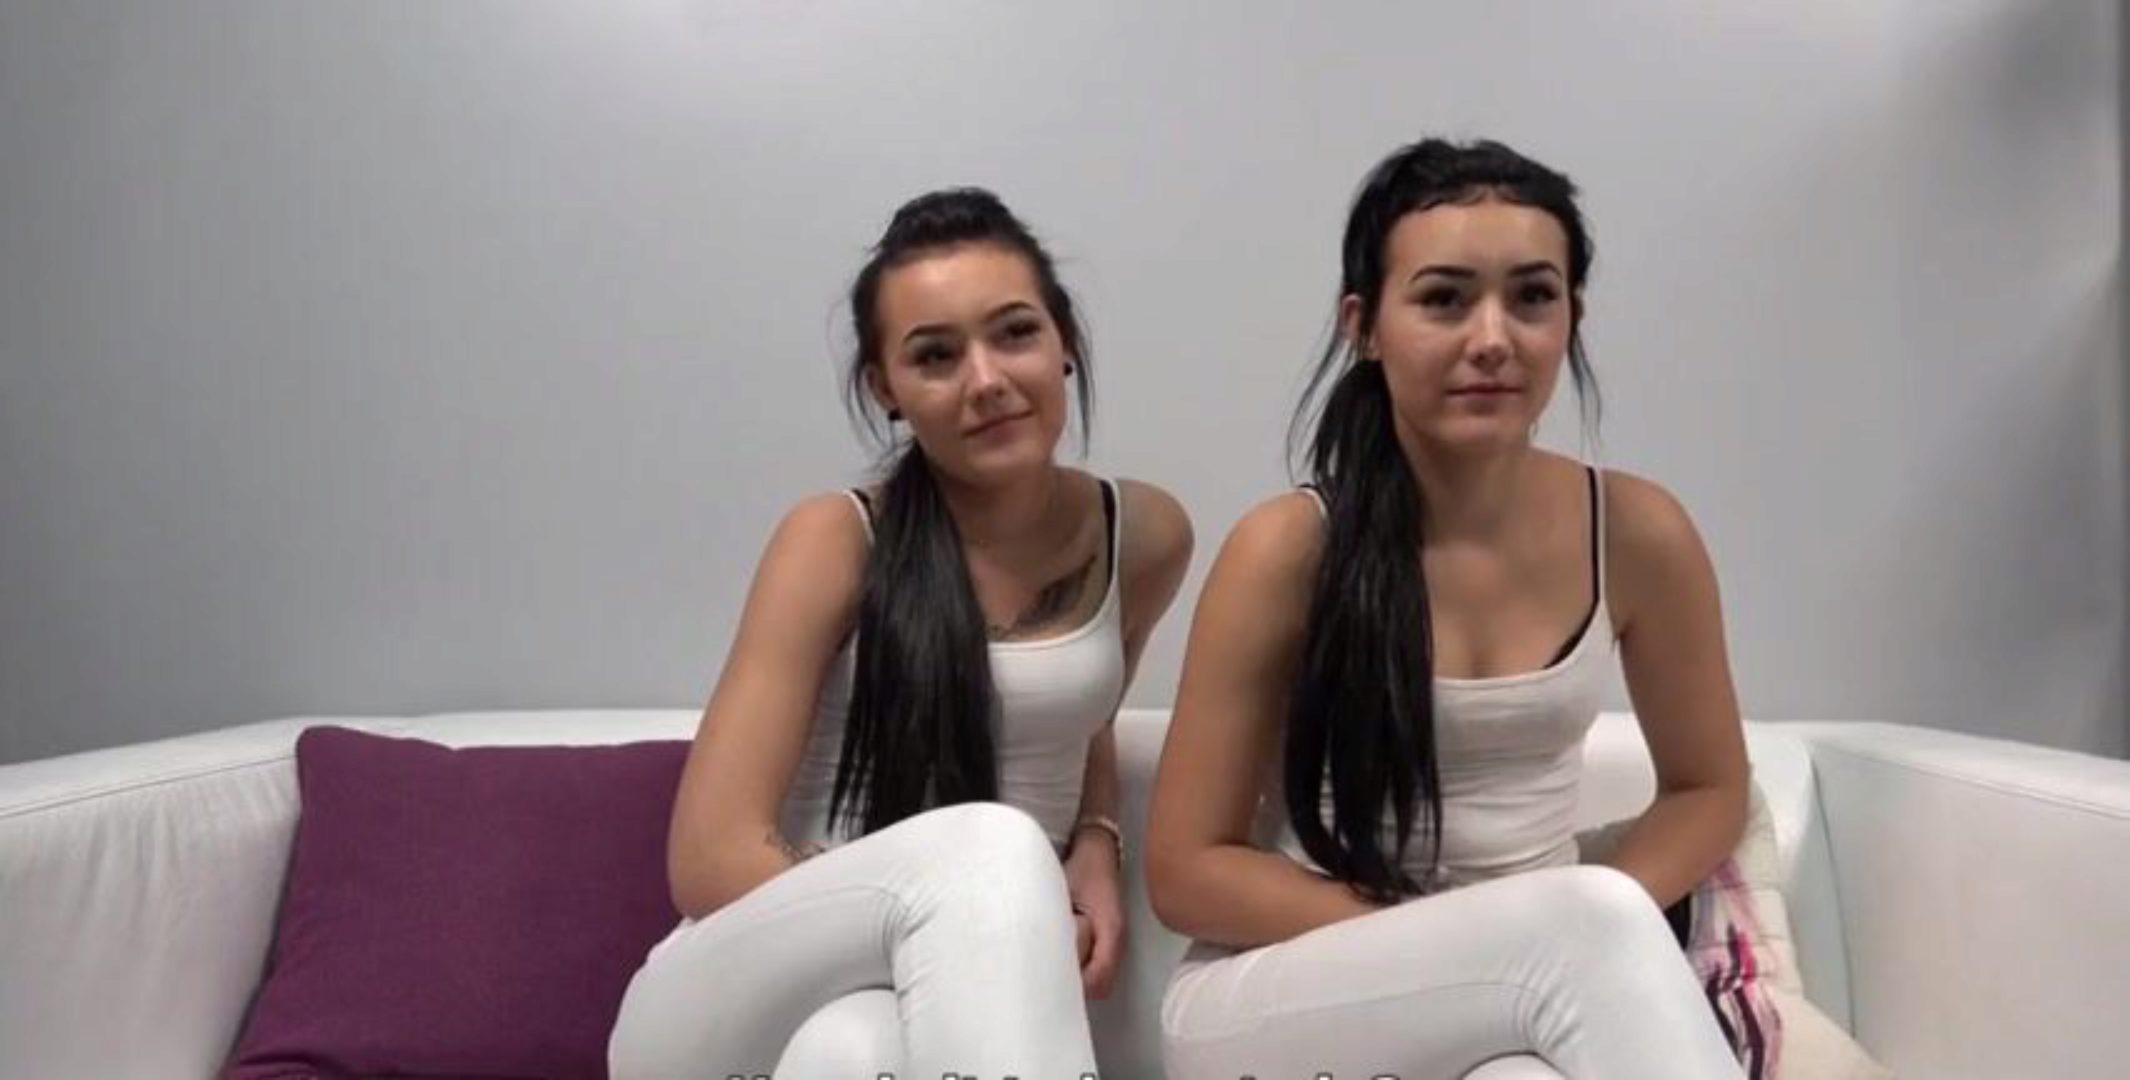 Hot Emo Lesbian Twin - Lesbian Identical Twin Sisters The Jolie Twins - XVDS TV